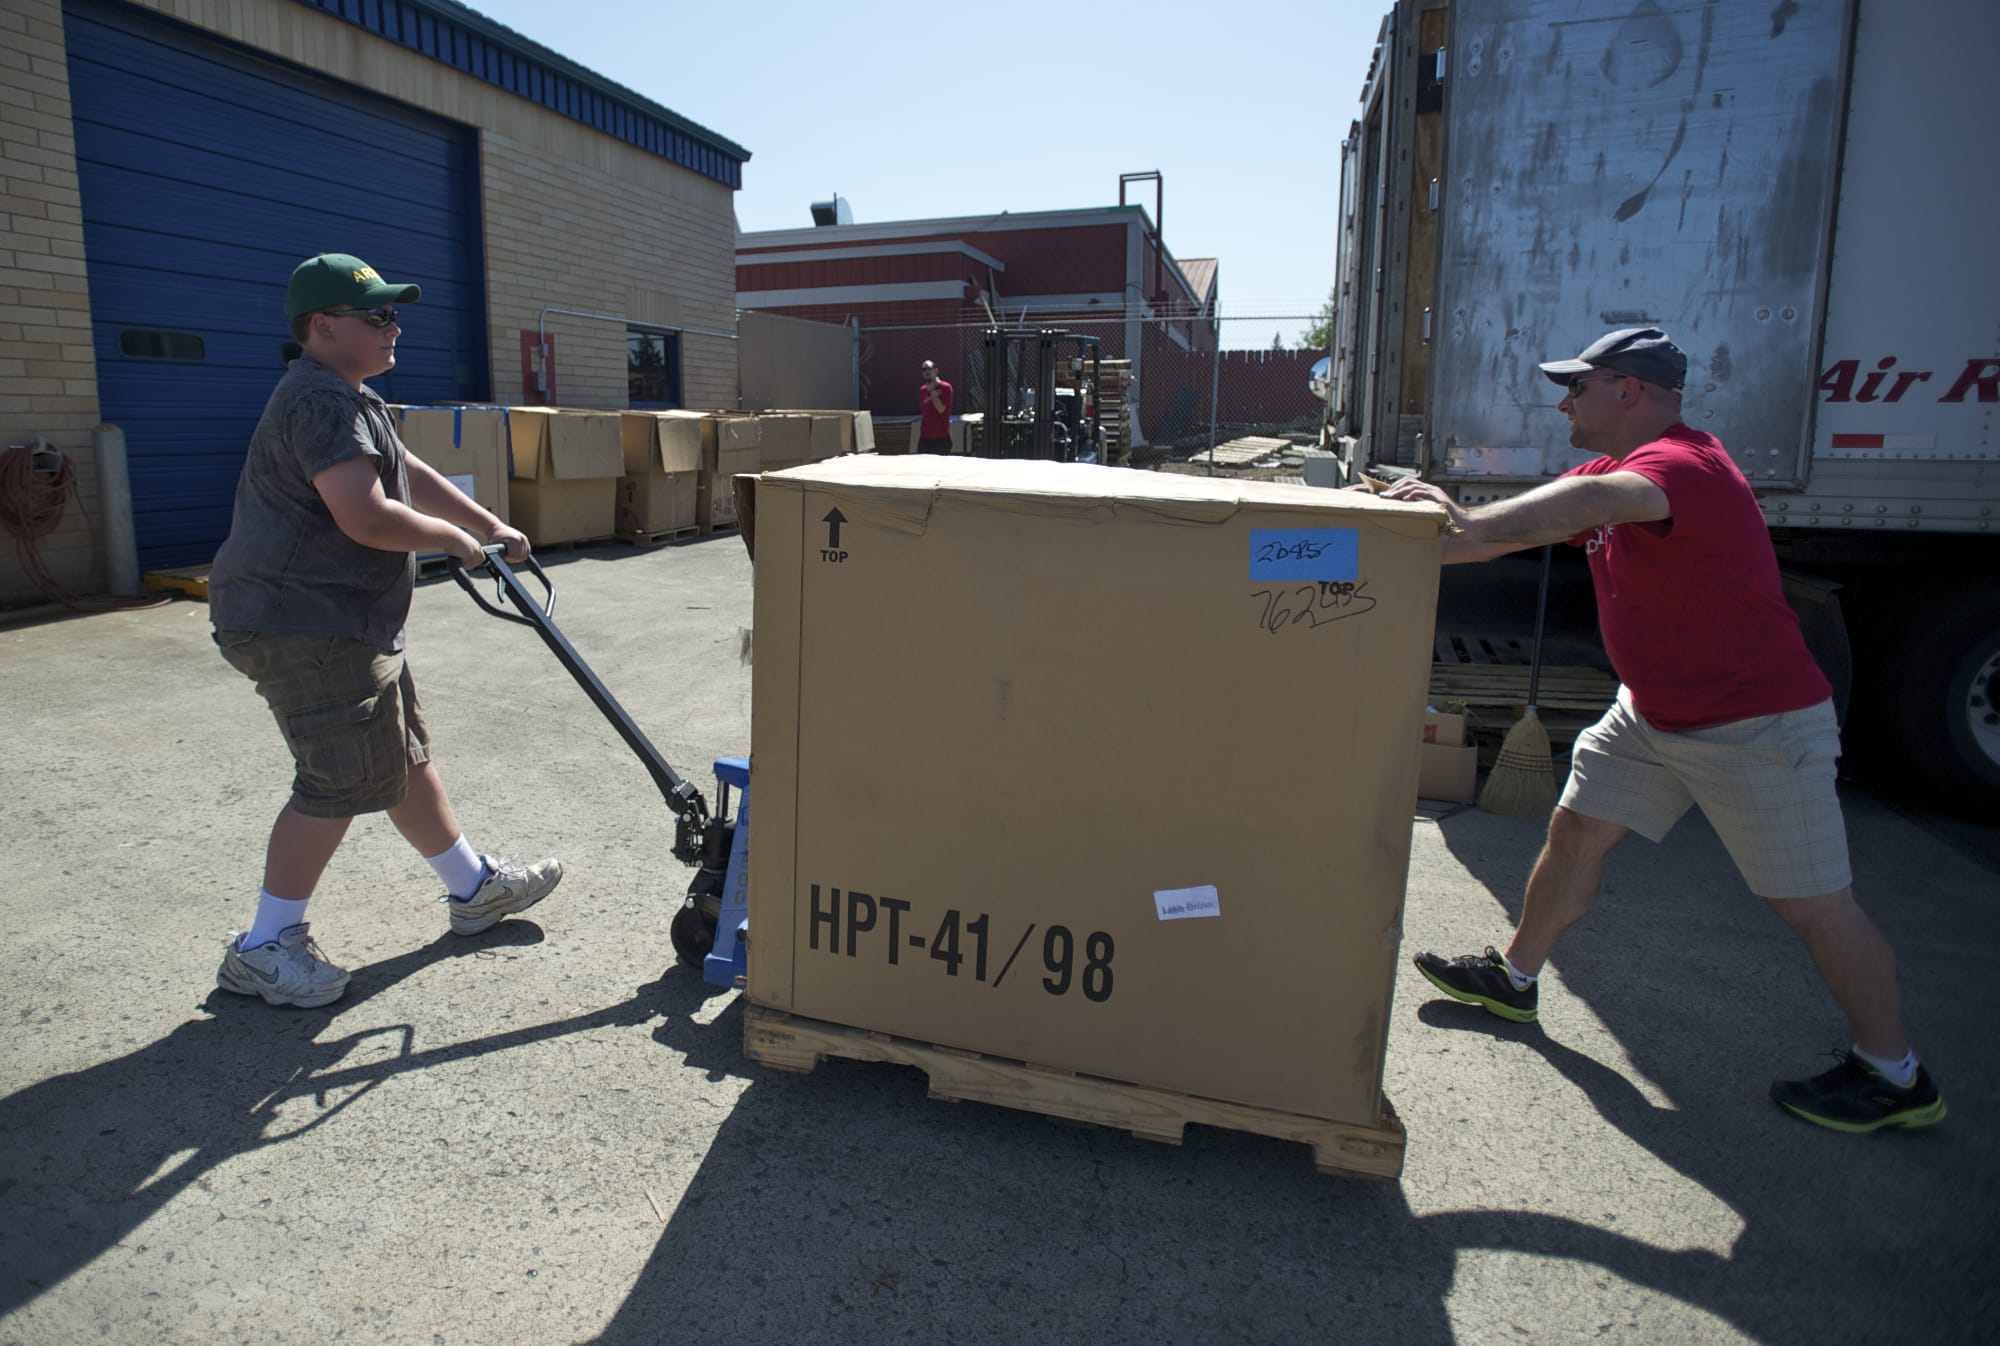 Brandon Hanson, 13, left, and his father, Kyle, move a large box filled with canned goods at the Caples Road post office.